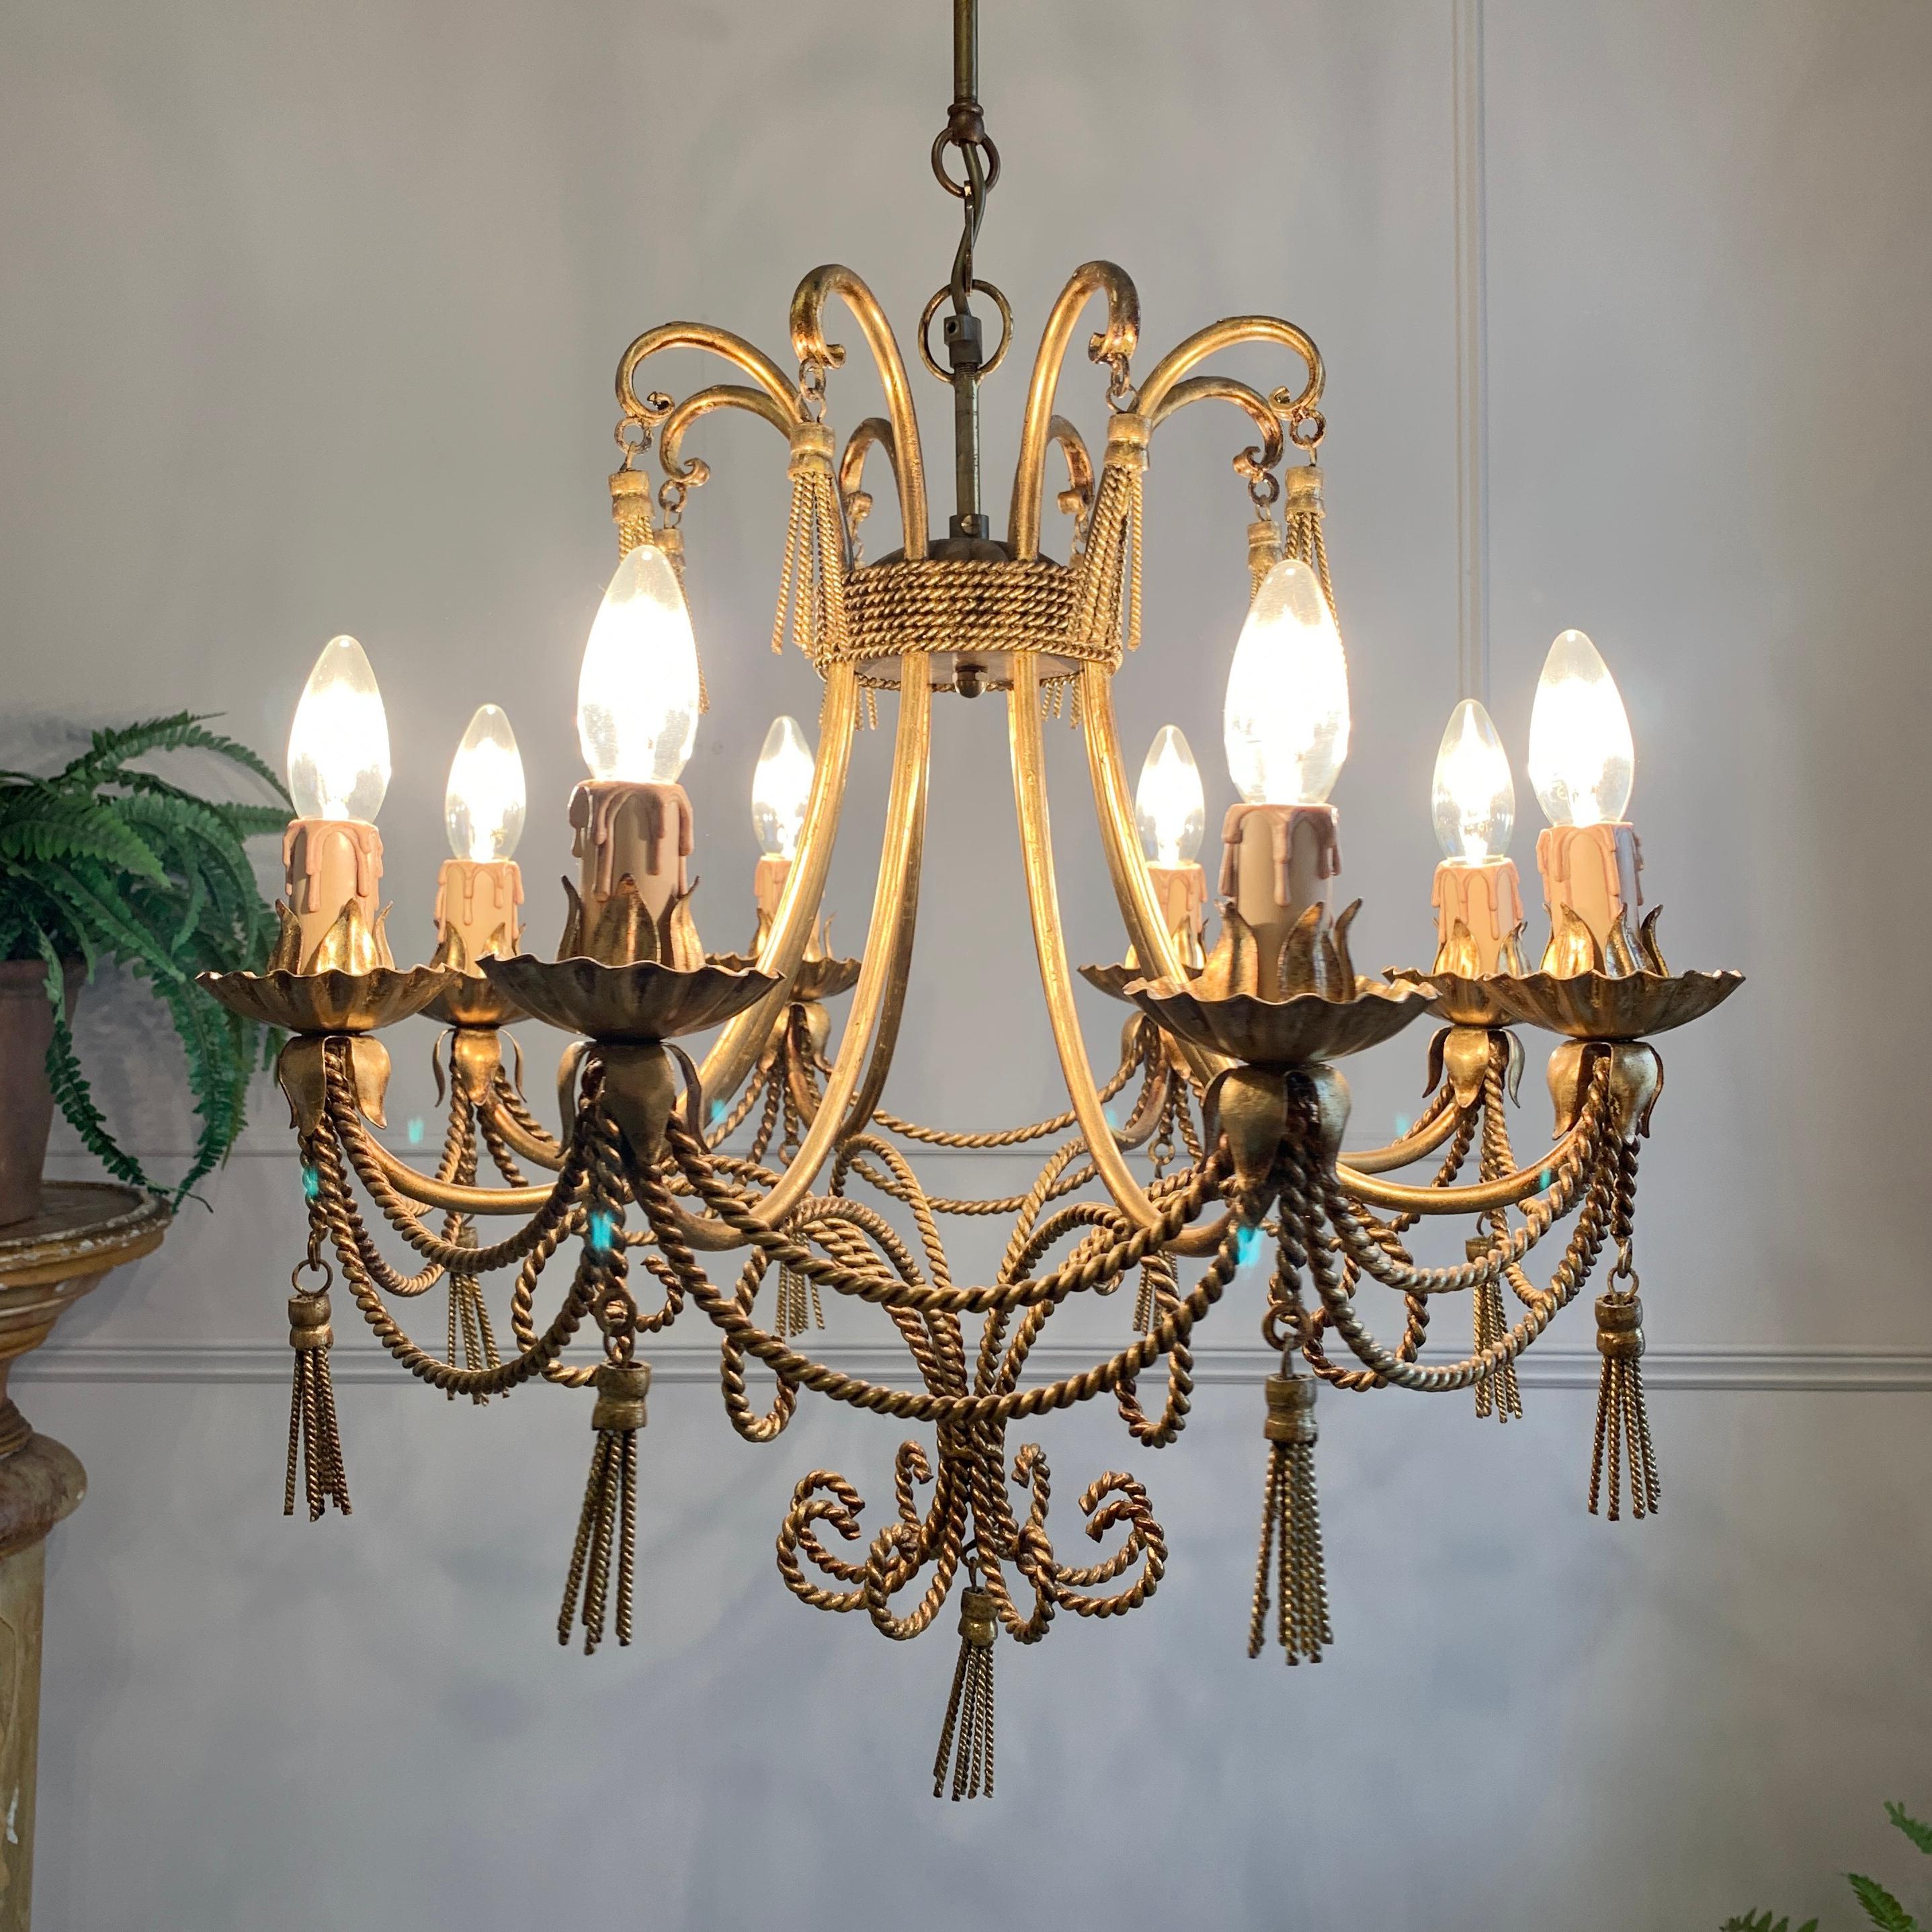 A beautiful twisted rope Italian chandelier, dating to the 1950's and crafted from gilt covered steel. The rope and tassel detailing on this light is impeccable and oozes mid century Hollywood glamour
The chandelier has 8 bulb holders, each taking